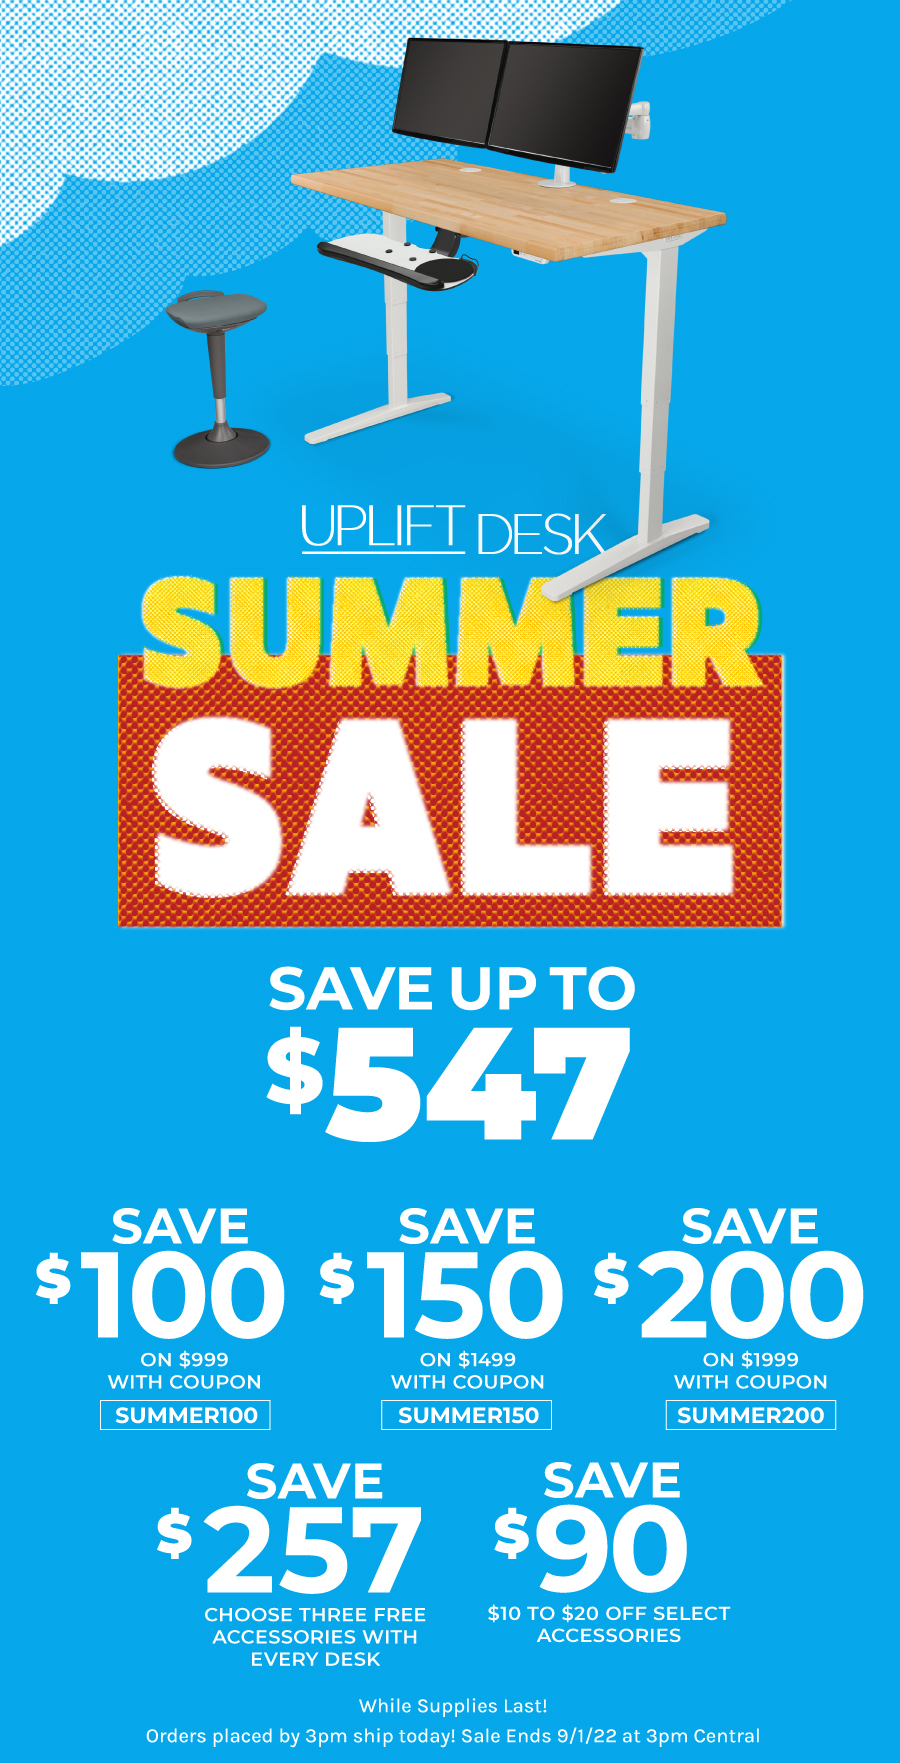 Save up to $547 during the sale